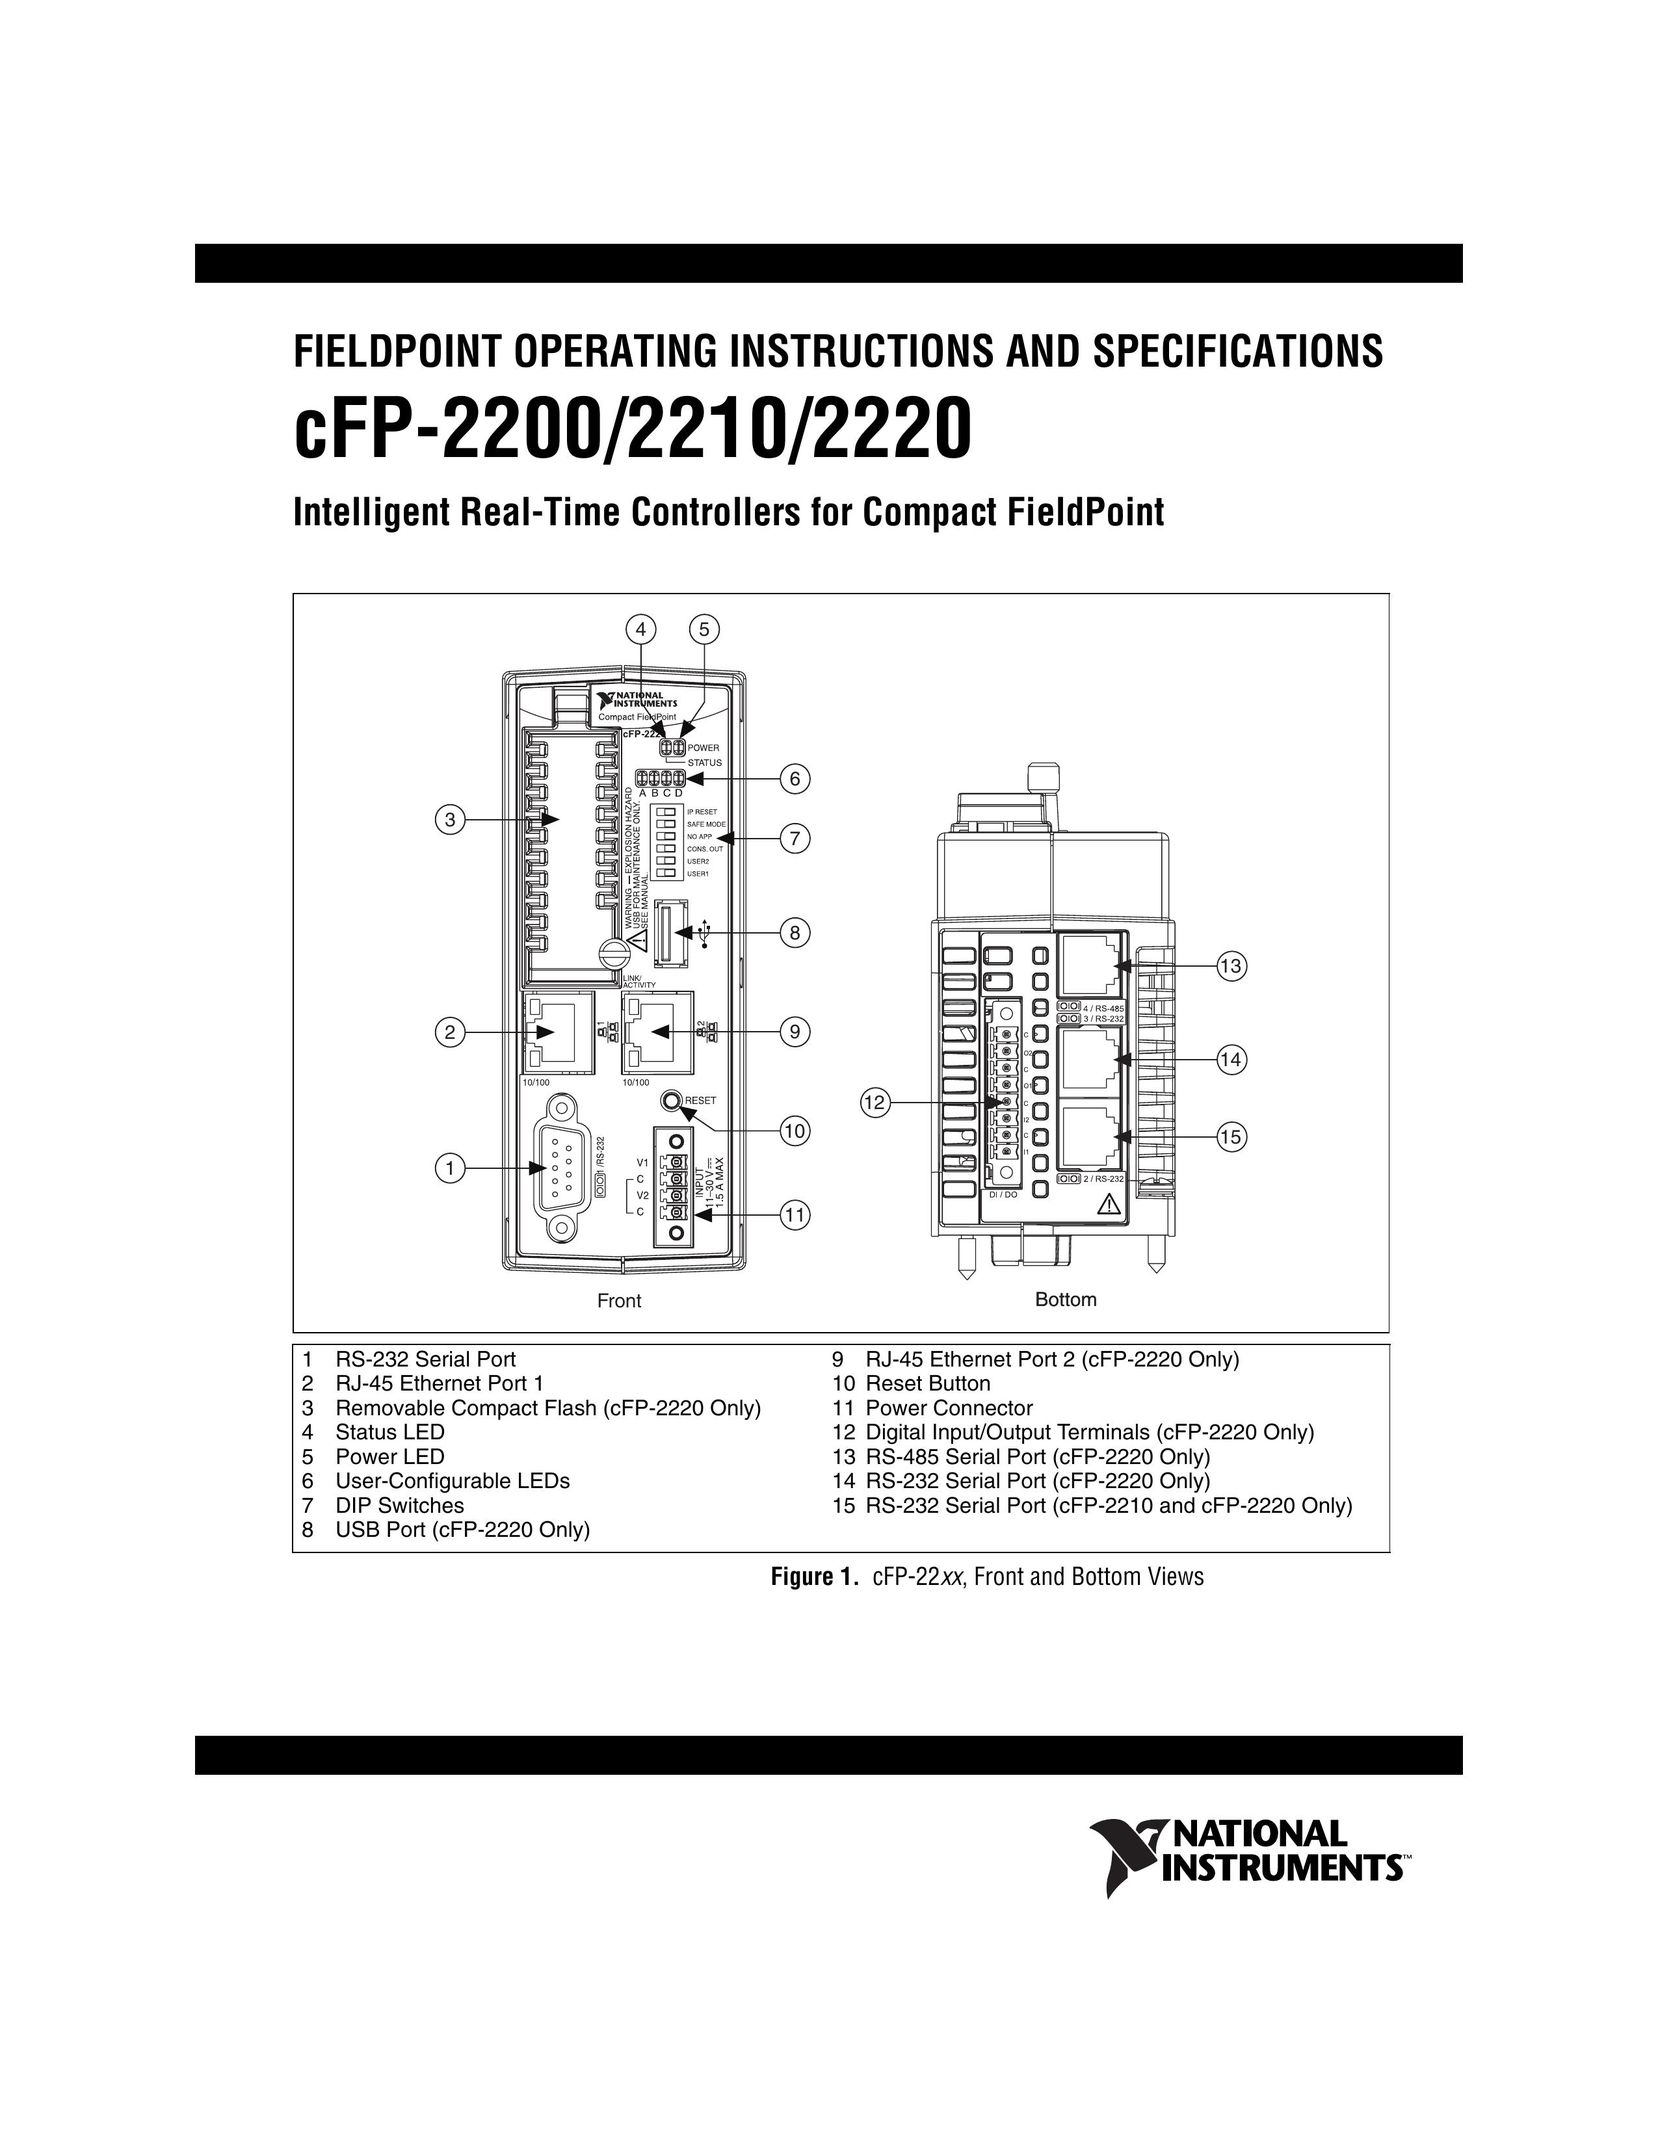 National Instruments CFP-2220 Network Card User Manual